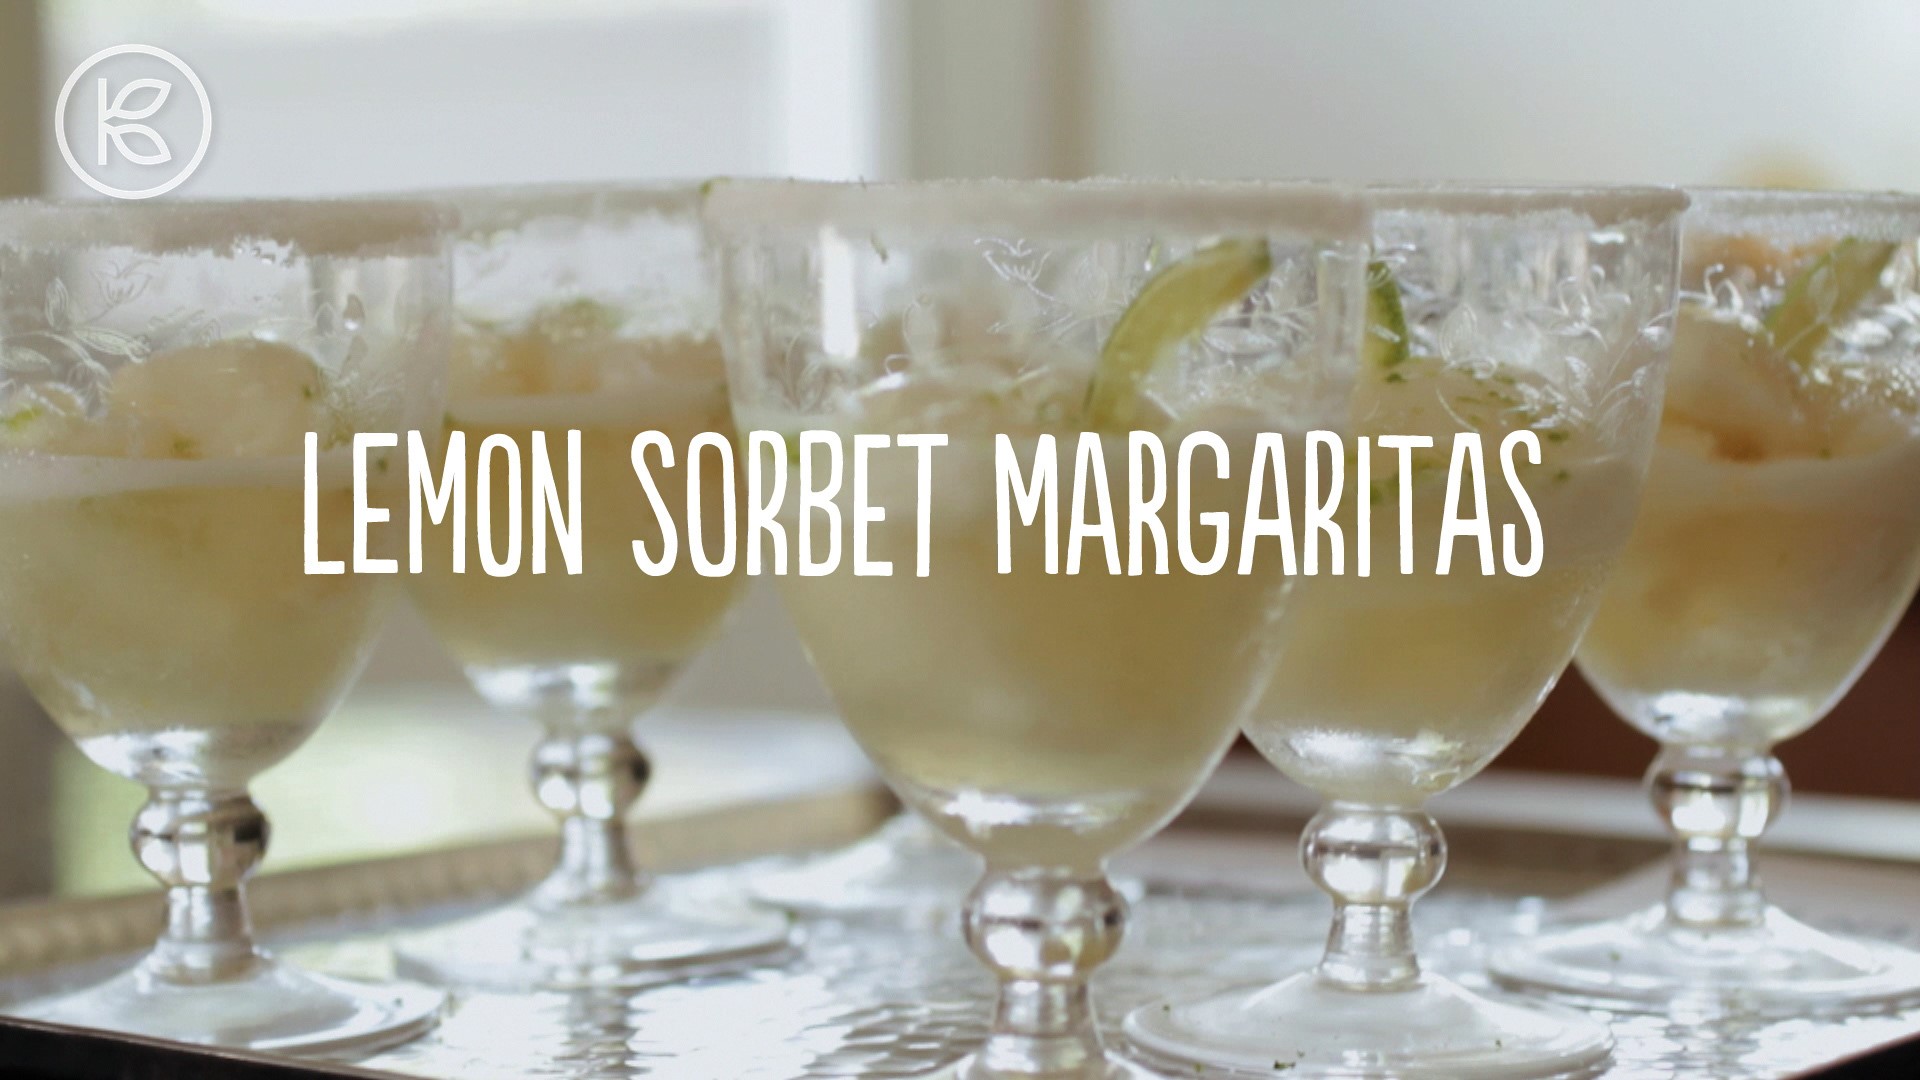 This sweet, refreshing recipe is part cocktail, part dessert....and totally delicious! You can use Tequila if you're making them for adults only or sub in some lime soda if kids will be joining you. Either way, you can't go wrong! Try these out the next t